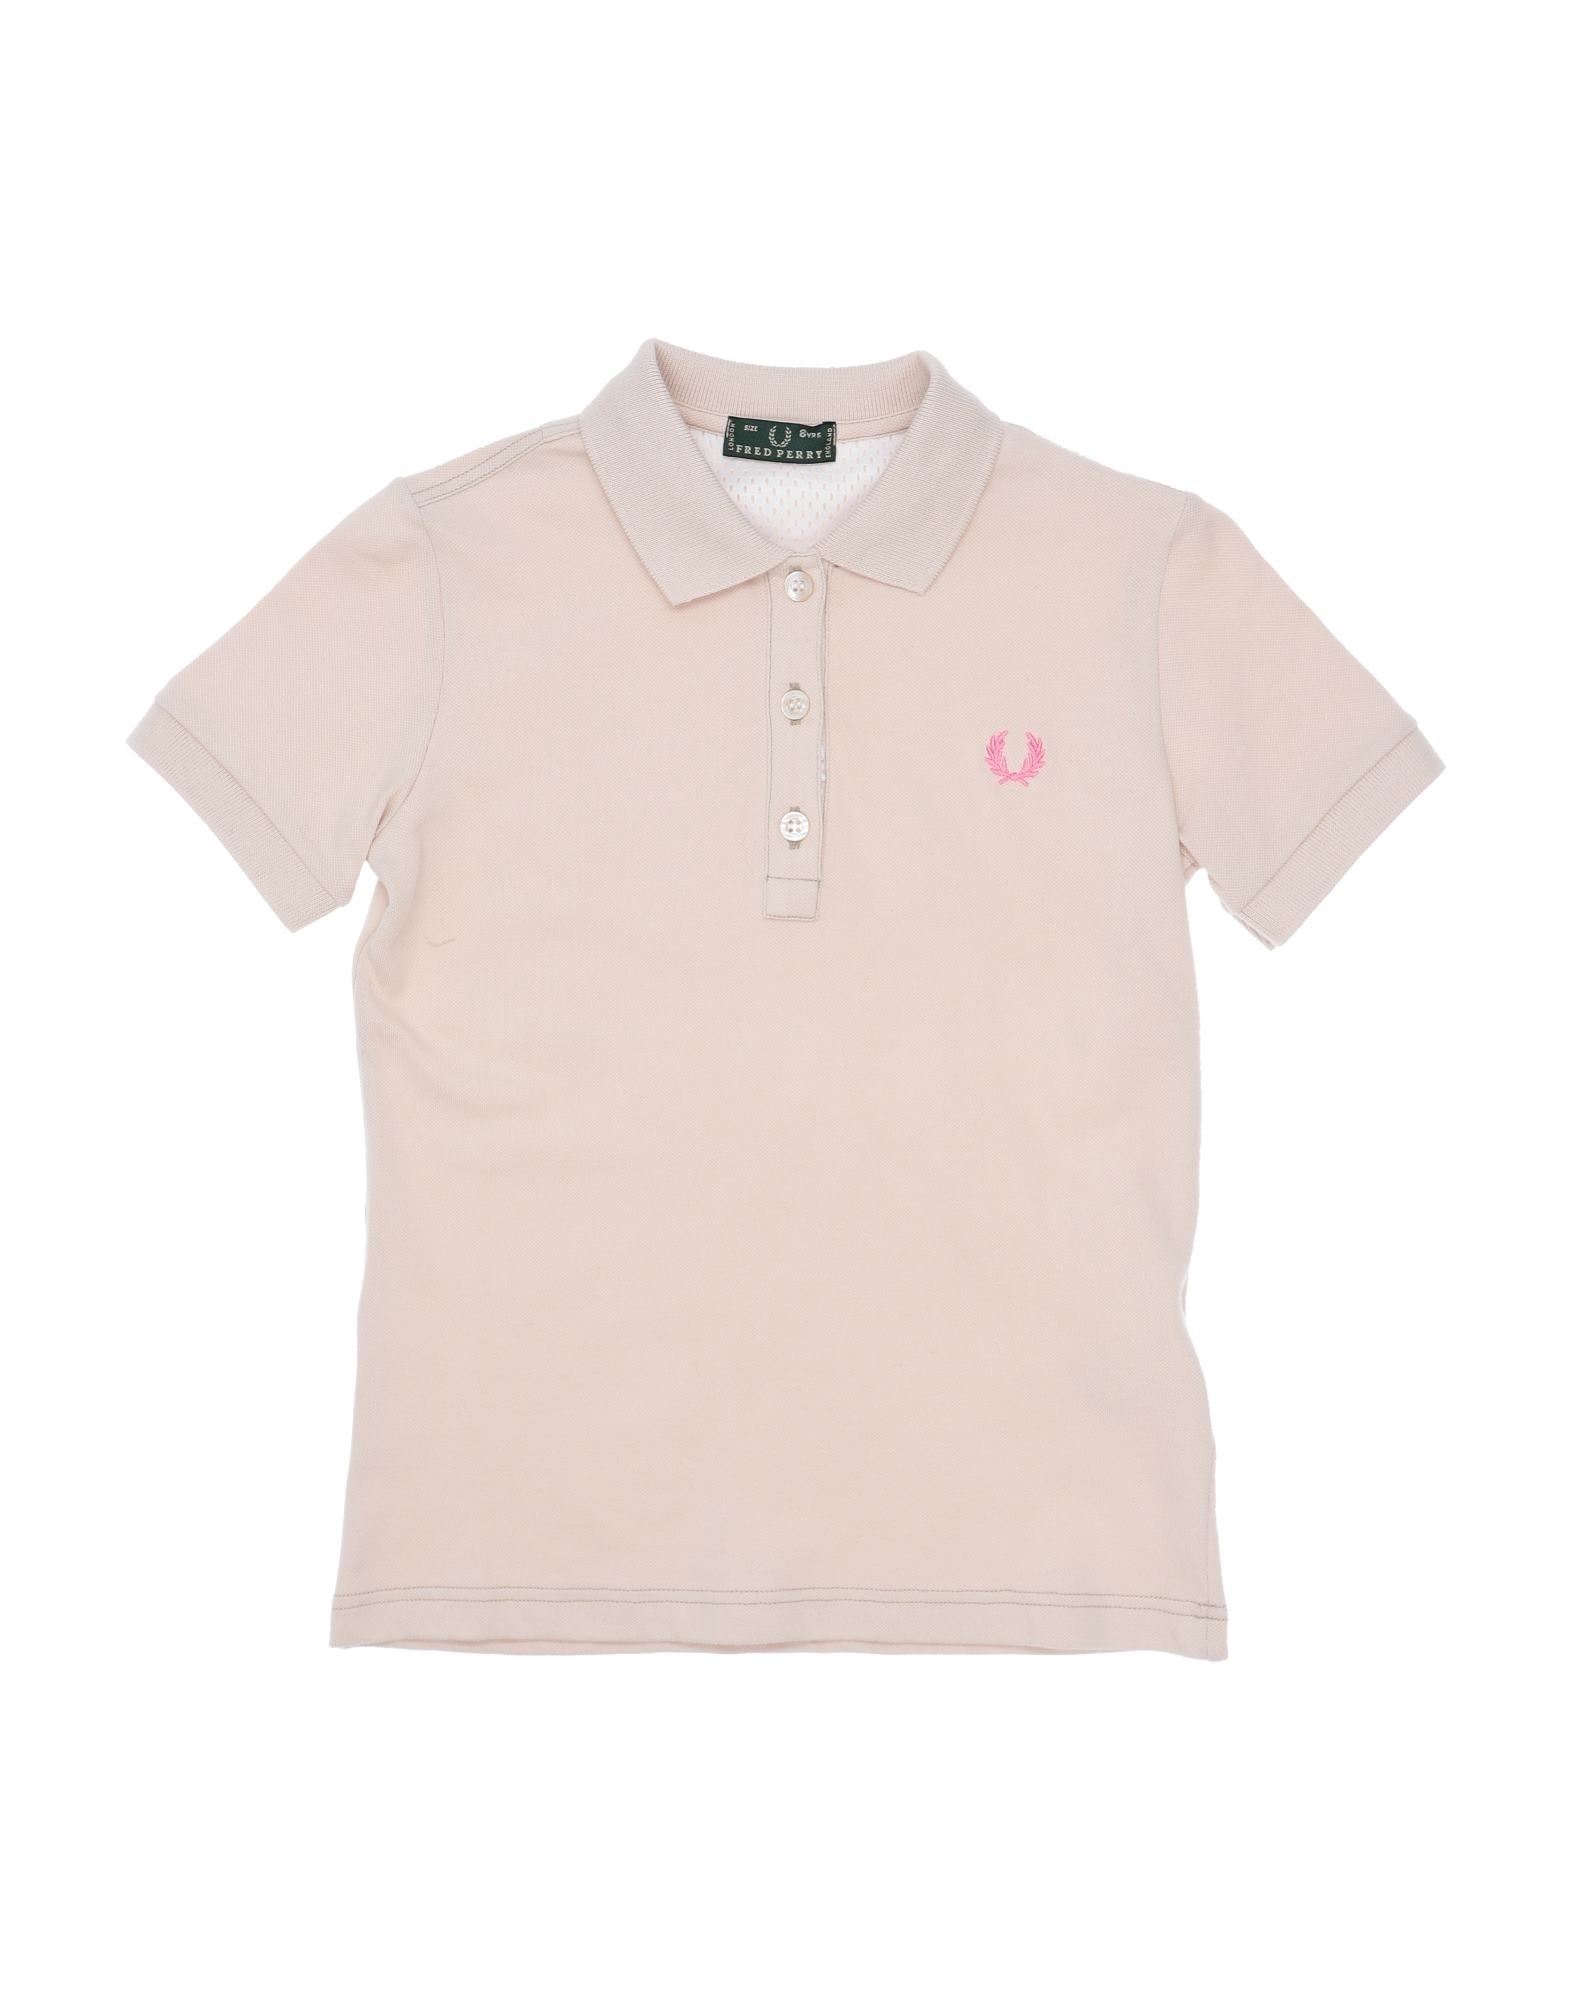 ＜YOOX＞ FRED PERRY ガールズ 3-8 歳 ポロシャツ ペールピンク 8 コットン 95% / ポリウレタン 5%画像